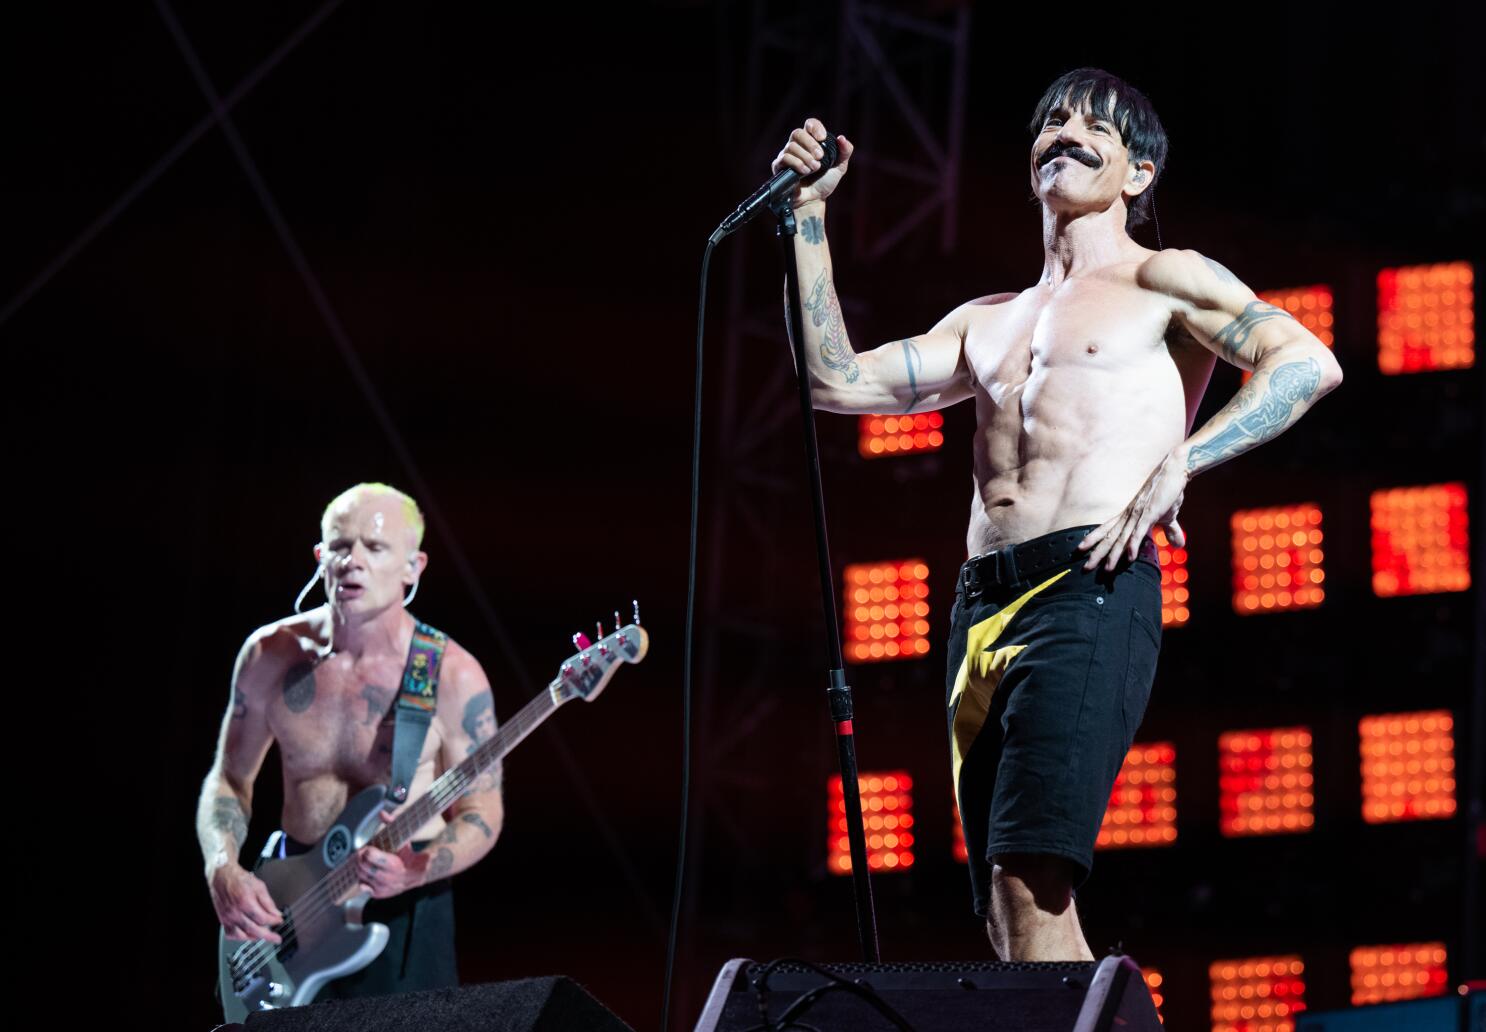 Red Hot Chili Peppers at Petco Park: 10 tips if you go to the